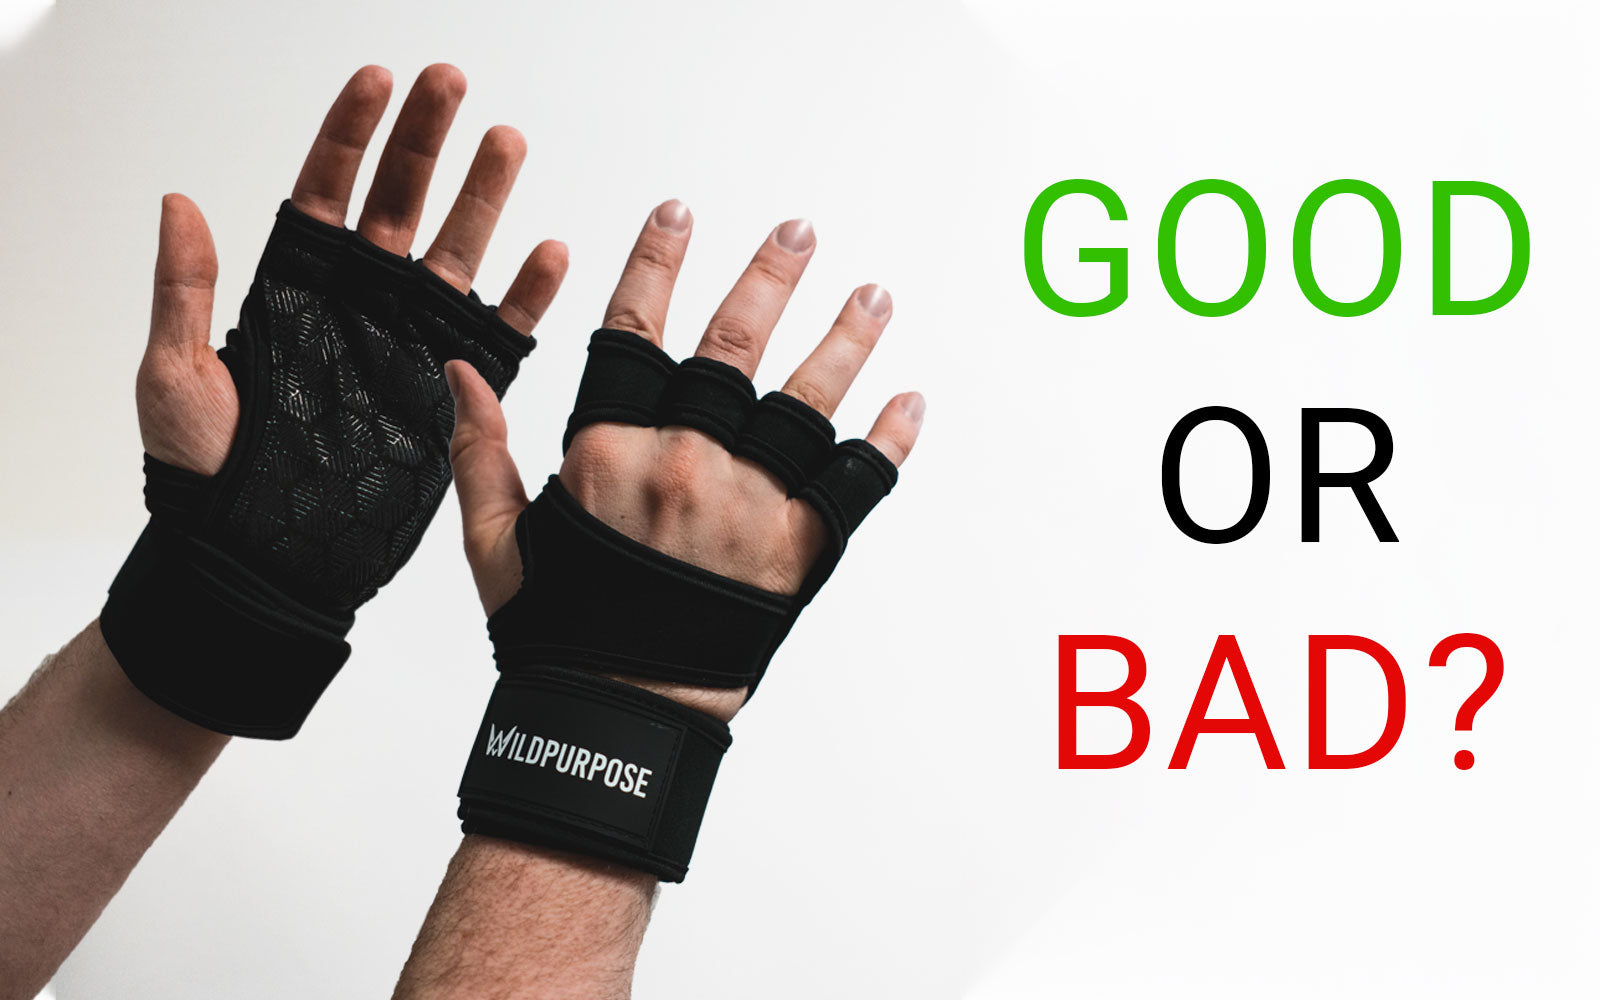 Have you been to the gym and asked yourself: why use weight lifting gloves? Or Should I use gloves to lift weights? Well in this article we’re going to be breaking down all the useful information to answer the question of why use weight lifting gloves, ar